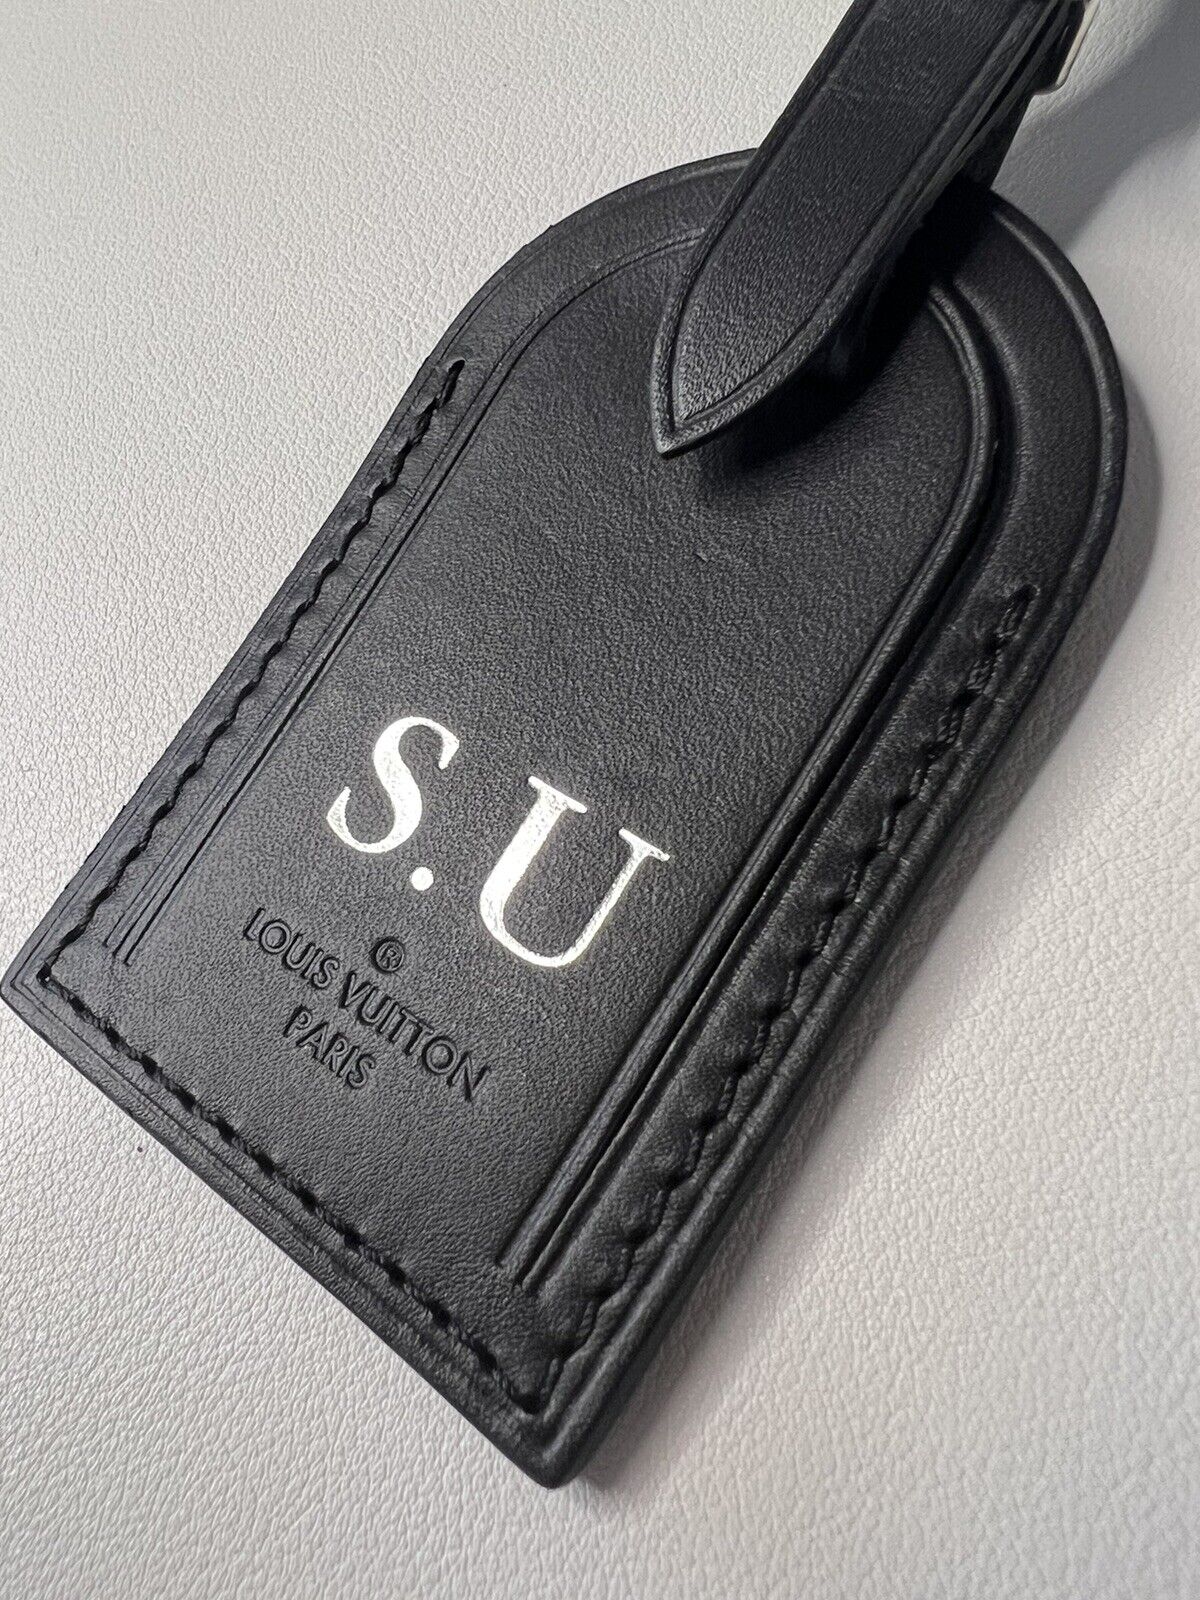 Louis Vuitton Name Tag w/ SU Initials Large Black Leather Silvertone Buckle